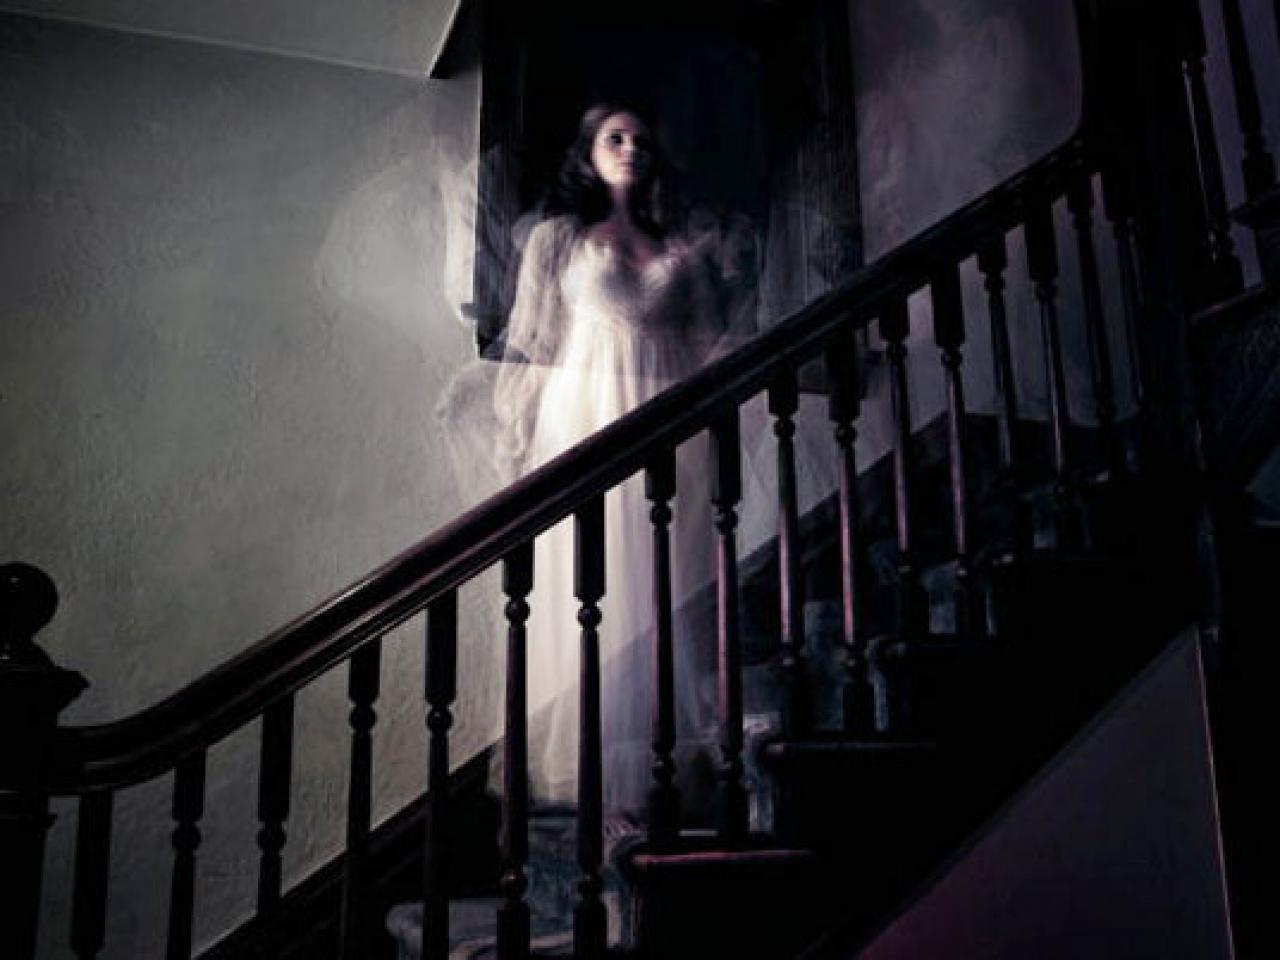 11 Of The Scariest Ghost Stories From Reddit | Travel Channel